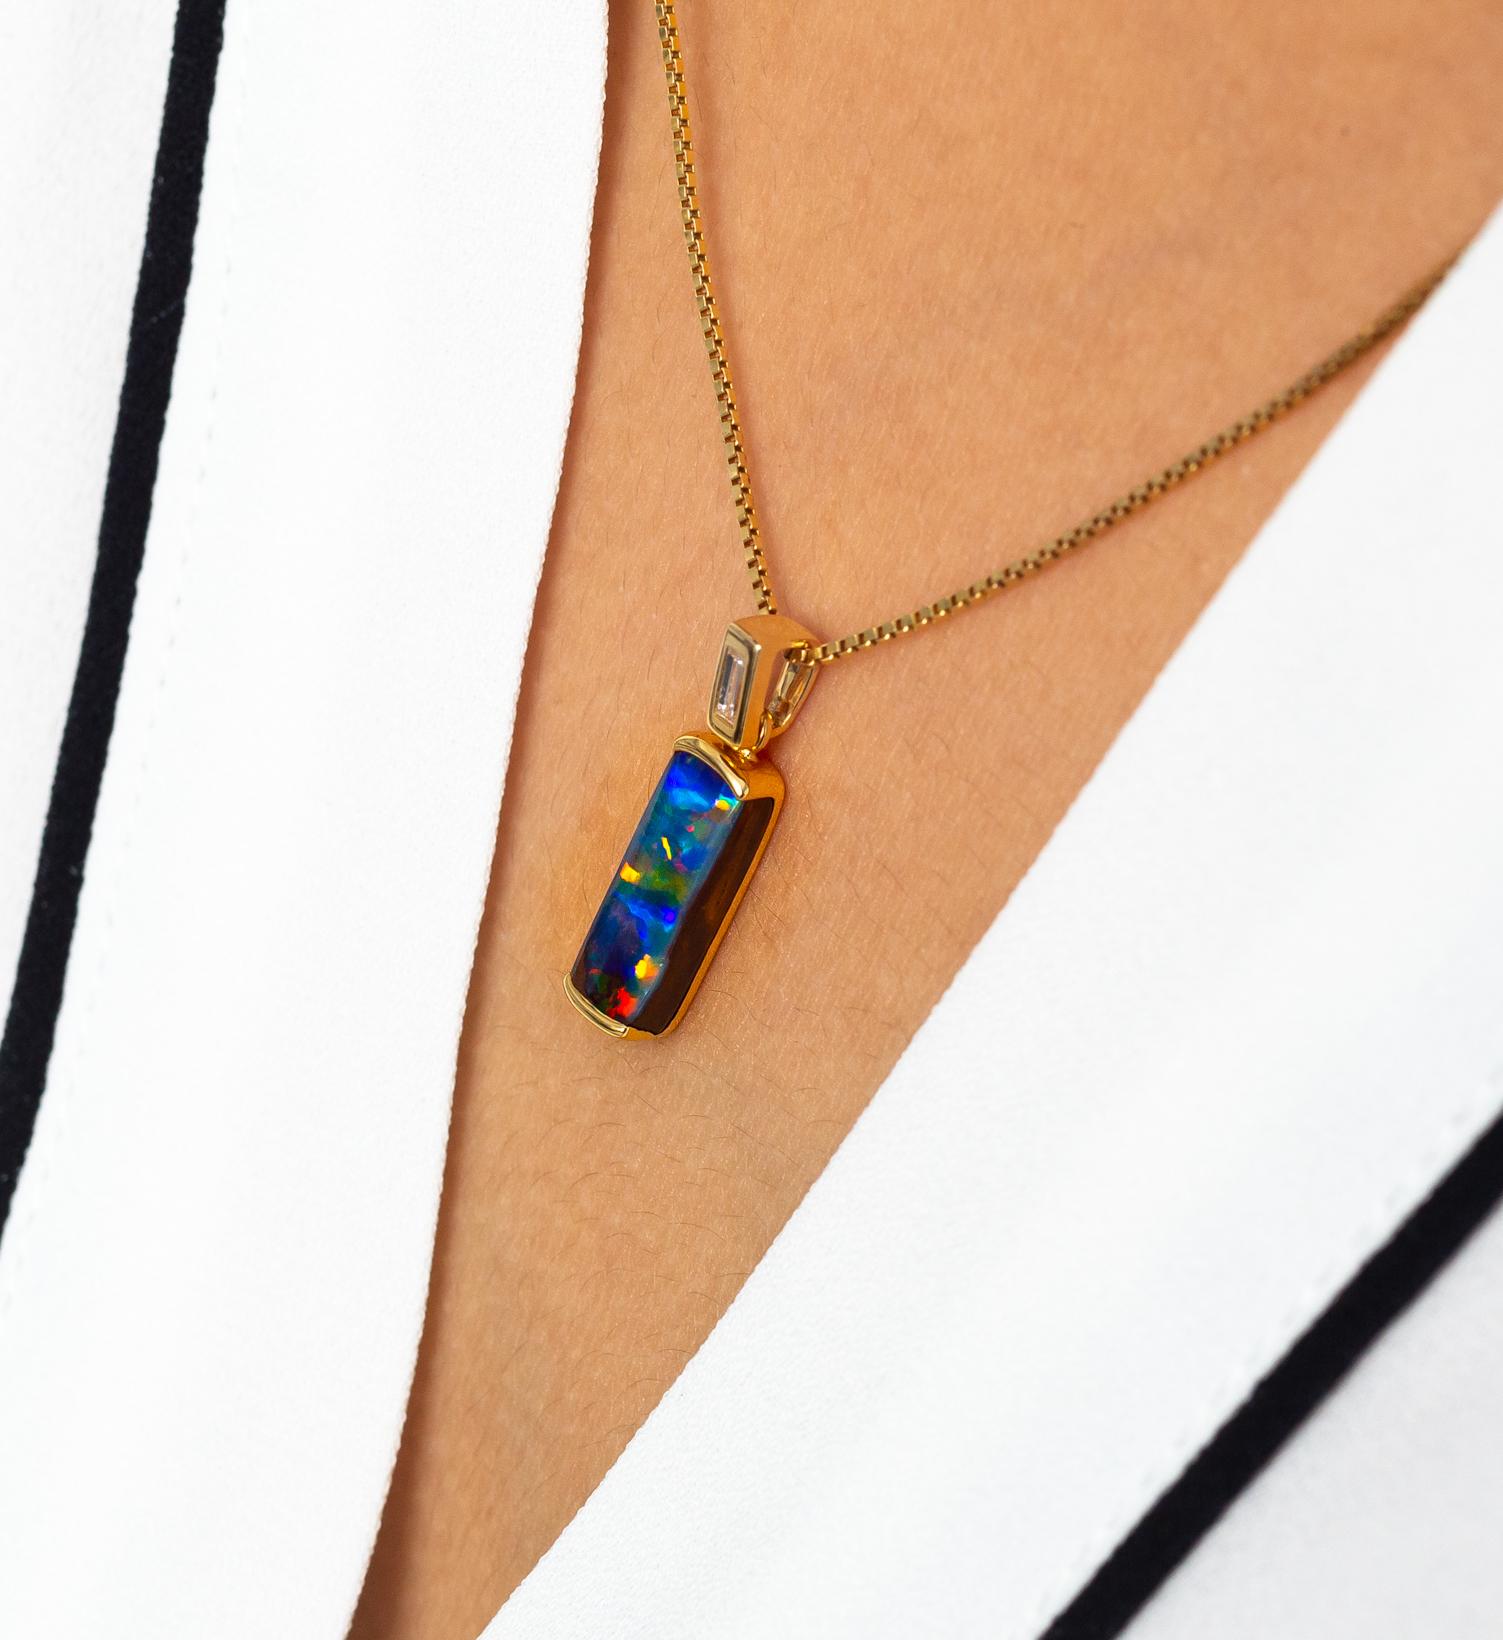 'Before Sunrise' is a vibrant opal pendant with an Australian opal (2.54ct) and a baguette diamond (0.06ct) bale. Fresh and dainty, it adds a touch of graceful panache to a work suit or an elegant dress, or an understated fashion ensemble. It is